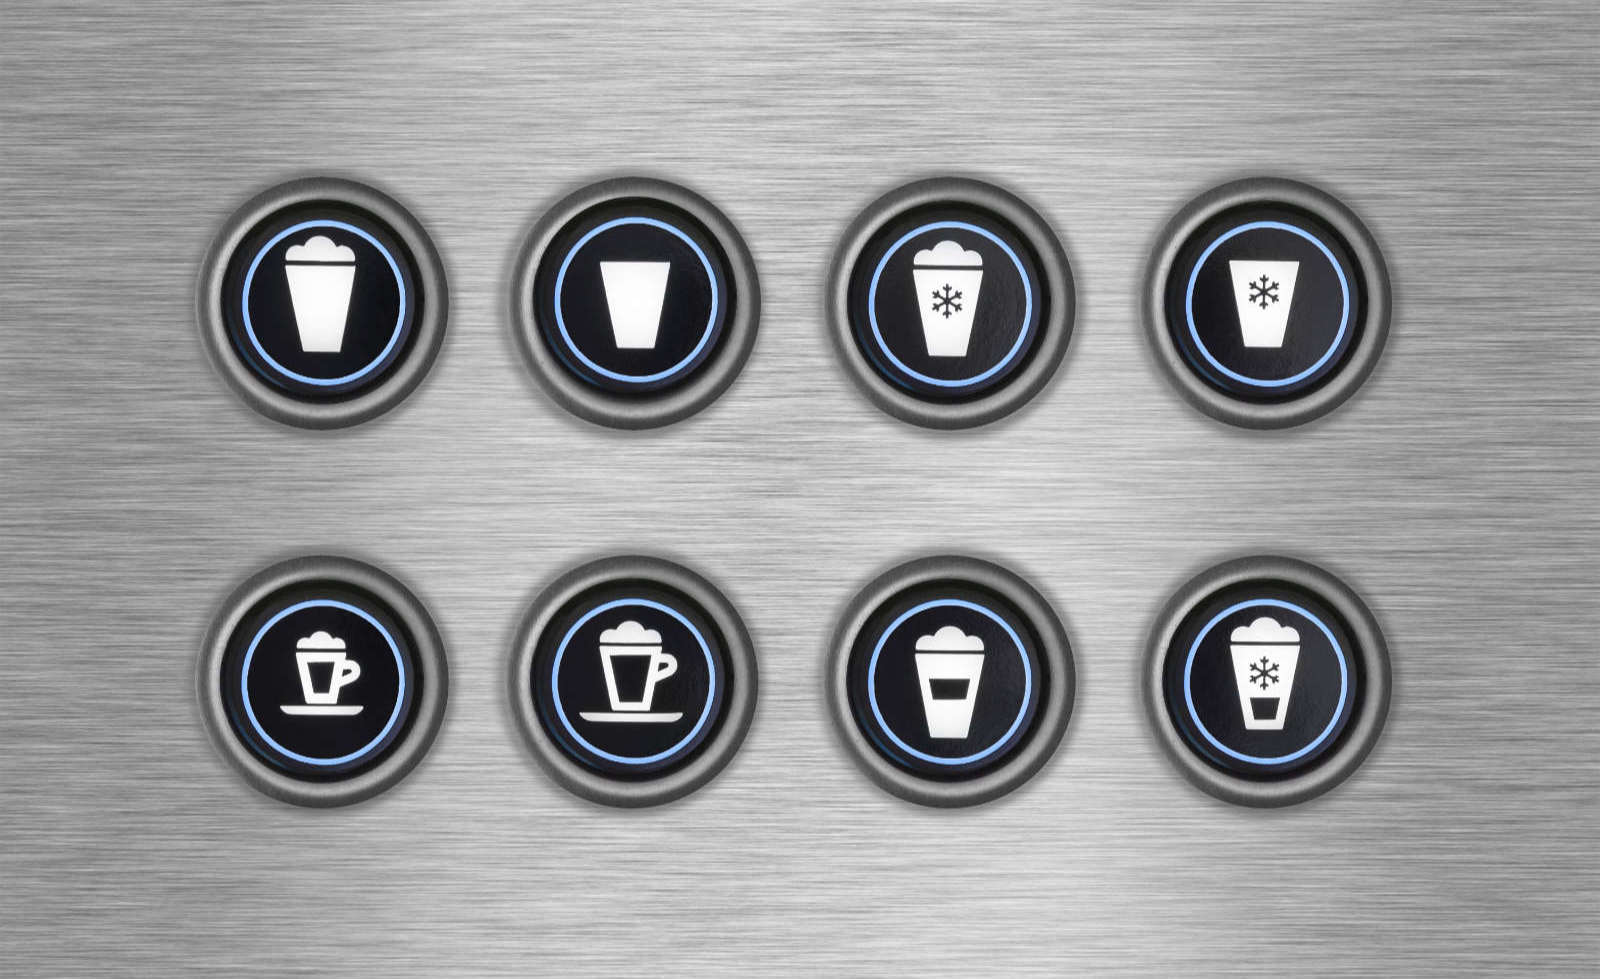 Hot drink machine selector buttons